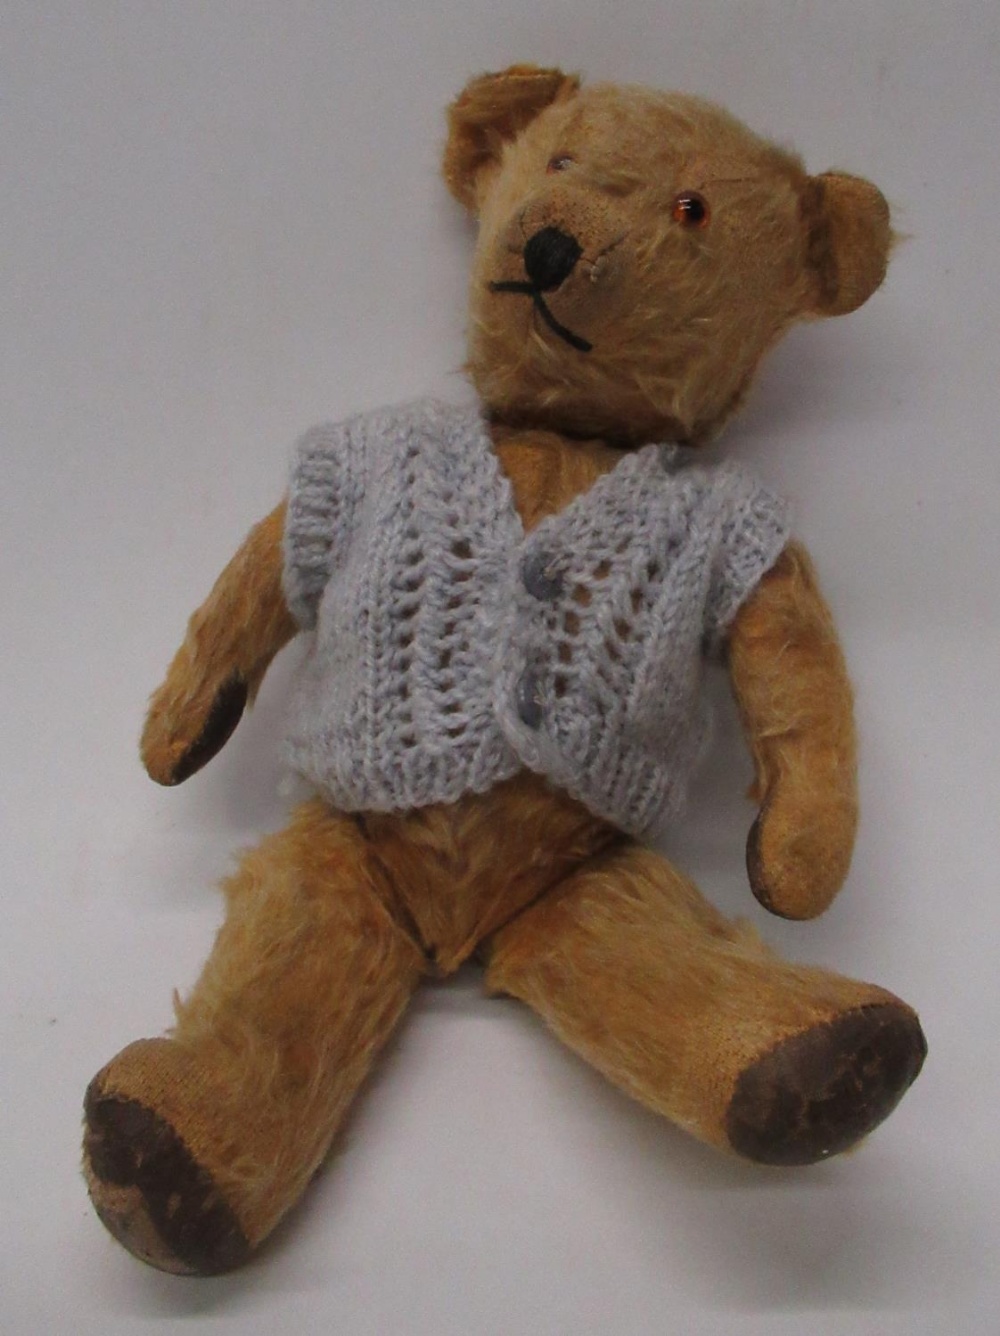 Collection of c1940s/50s British teddy bears including a c1950s Chiltern teddy bear in blonde mohair - Image 5 of 5